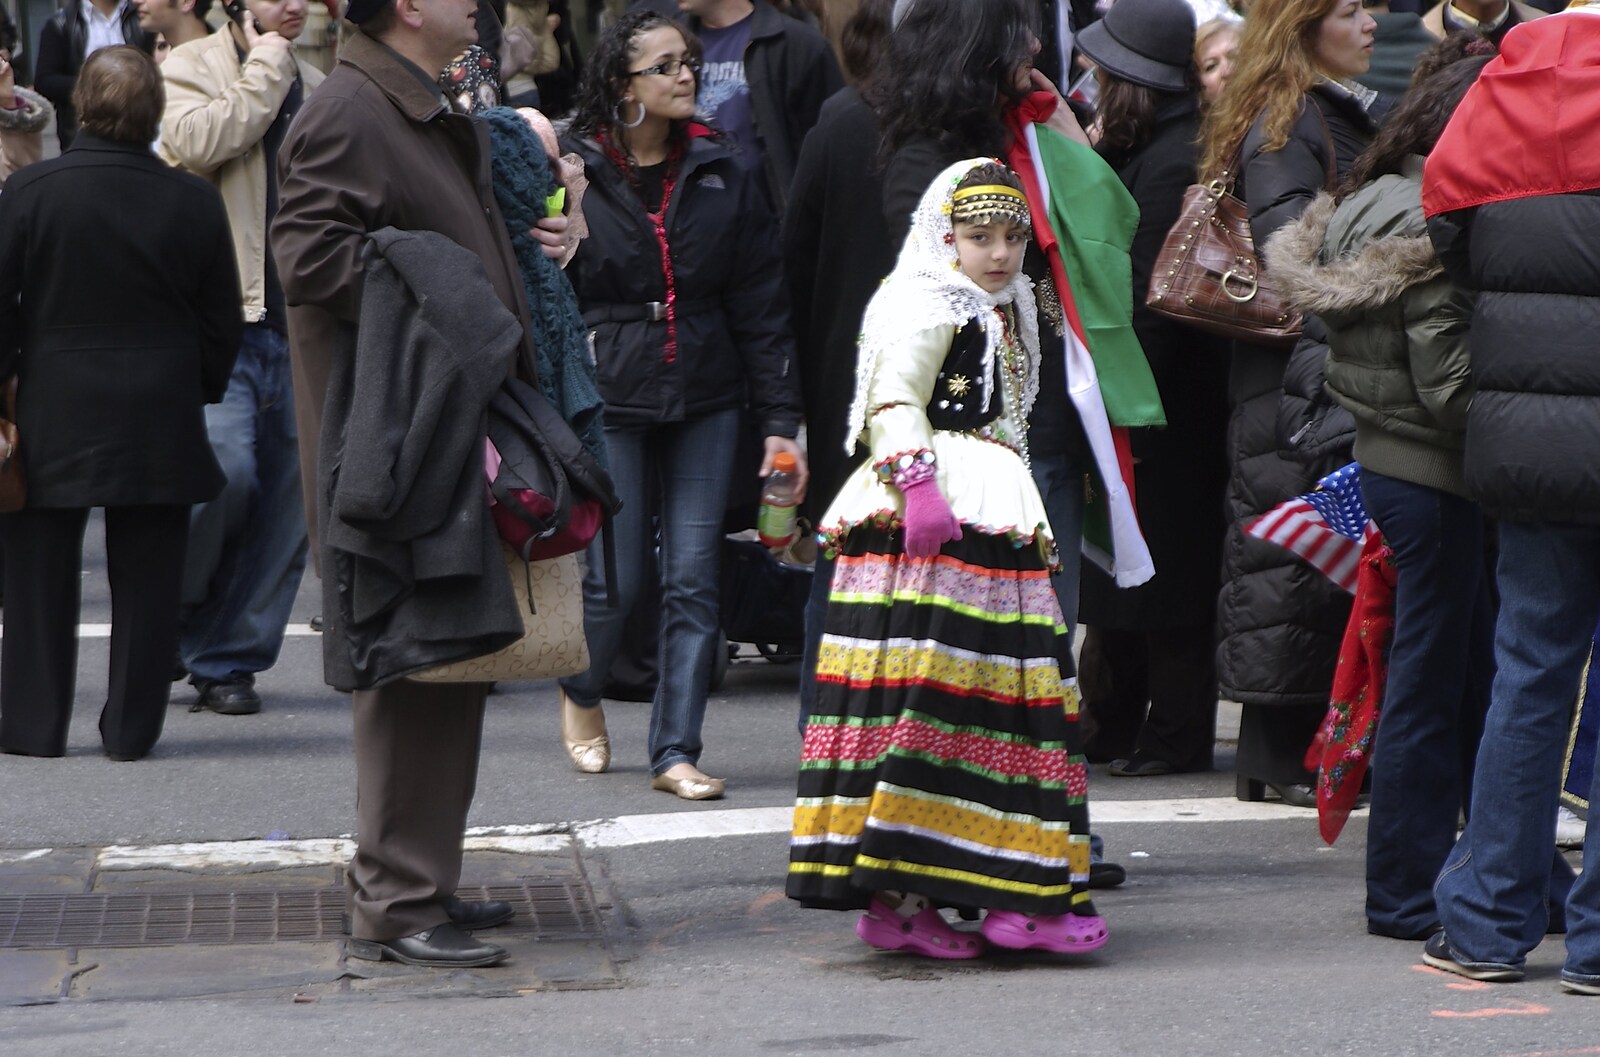 Persian Day Parade, Upper East Side and Midtown, New York, US - 25th March 2007: A girl in national dress